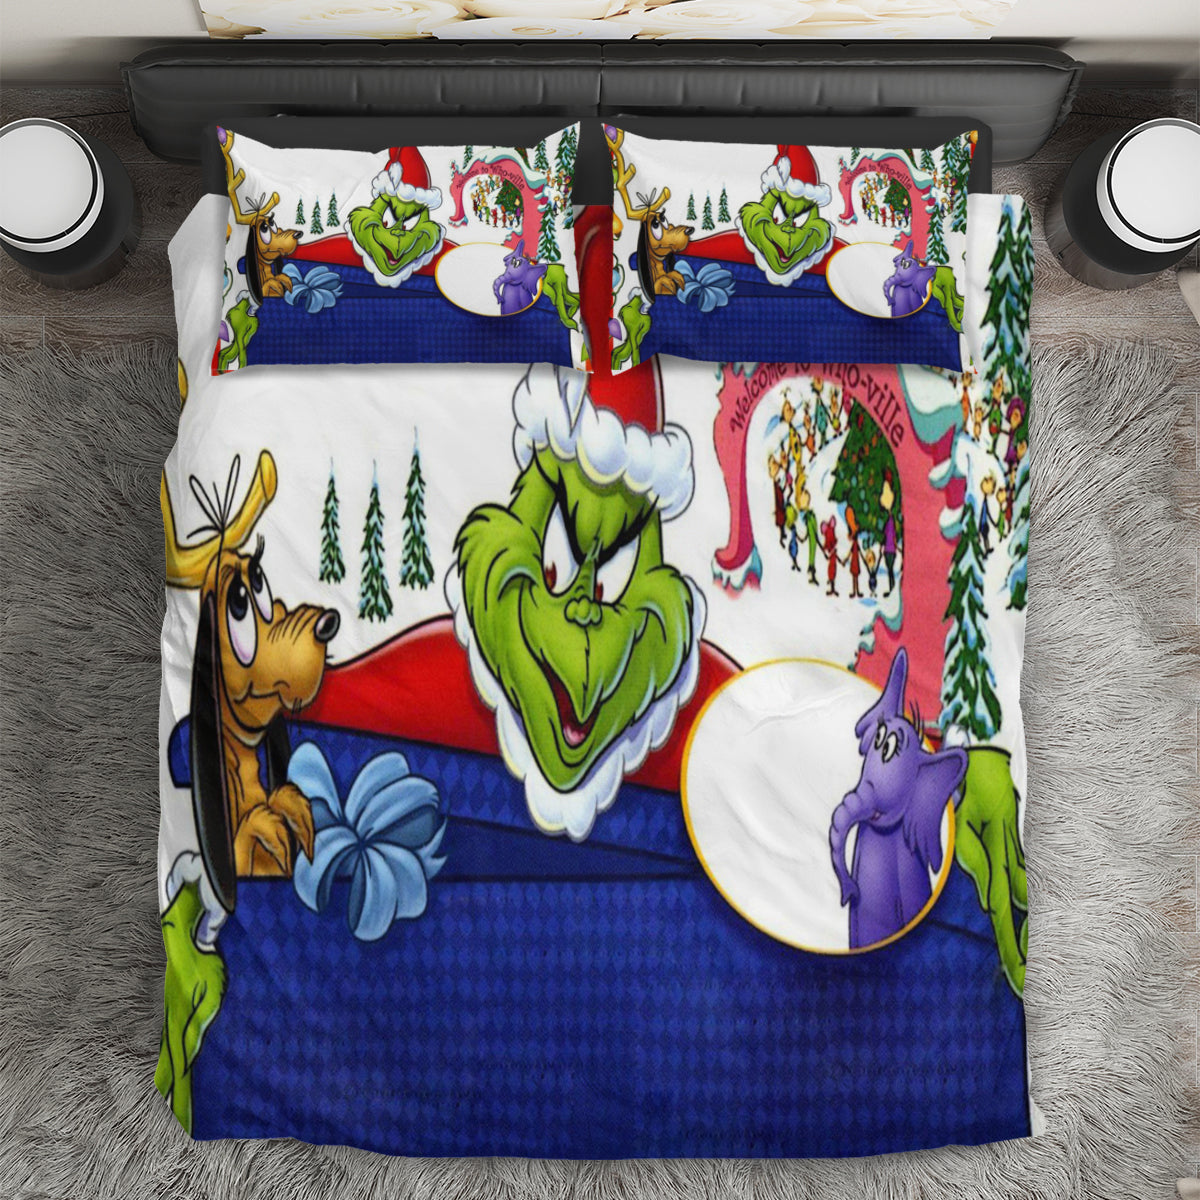 The Grinch Christmas Grinch Max 8 3PCS Bedding Set Duvet Cover And Pillow Cases Gift For Fan